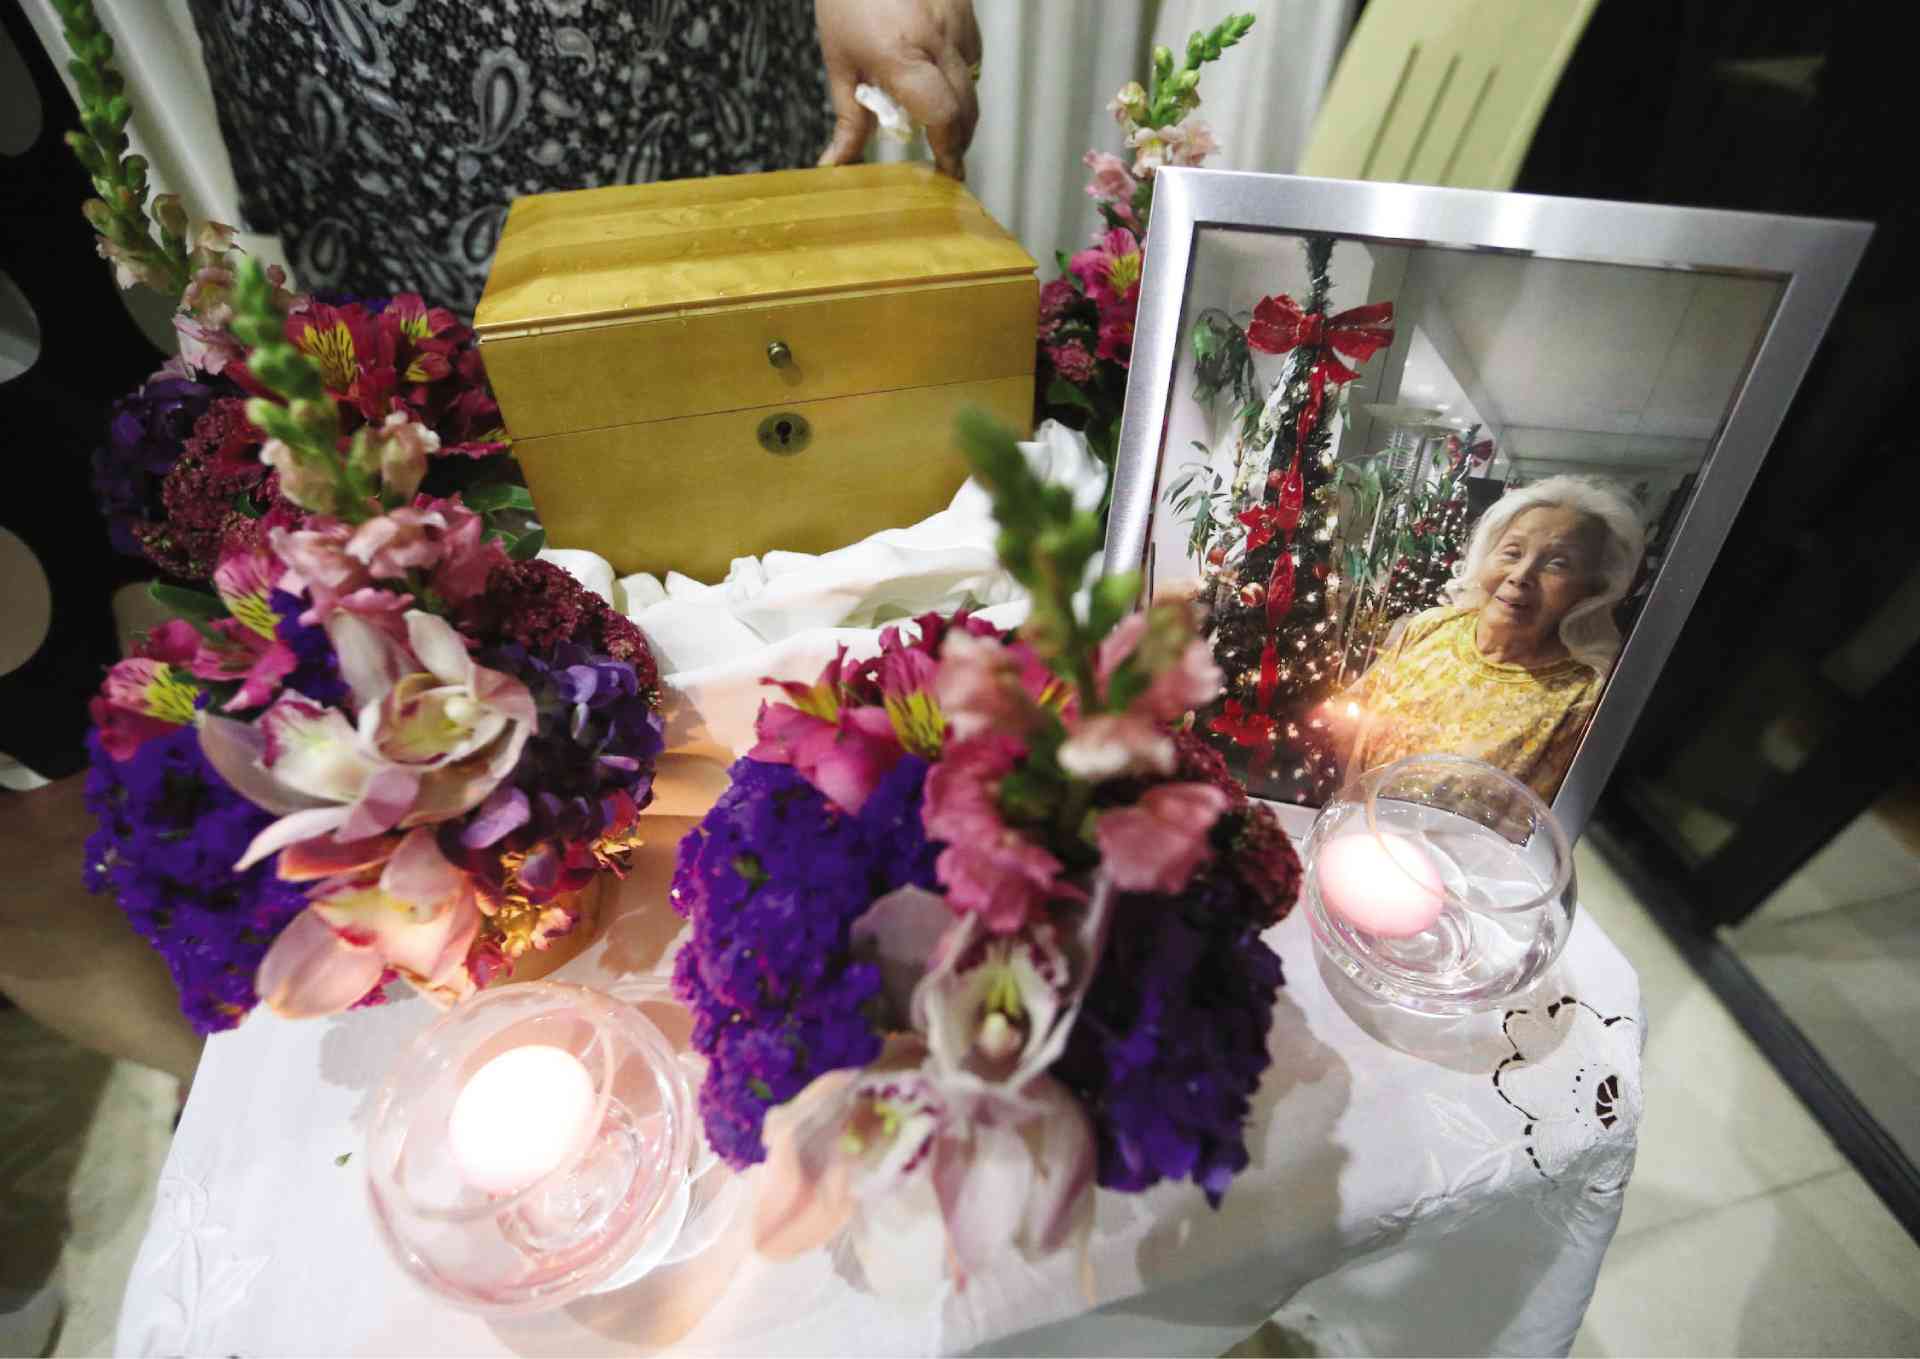 WOODEN urn containing Erlinda Kalaw-Ilusorio’s ashes, with a photograph of her taken last November.